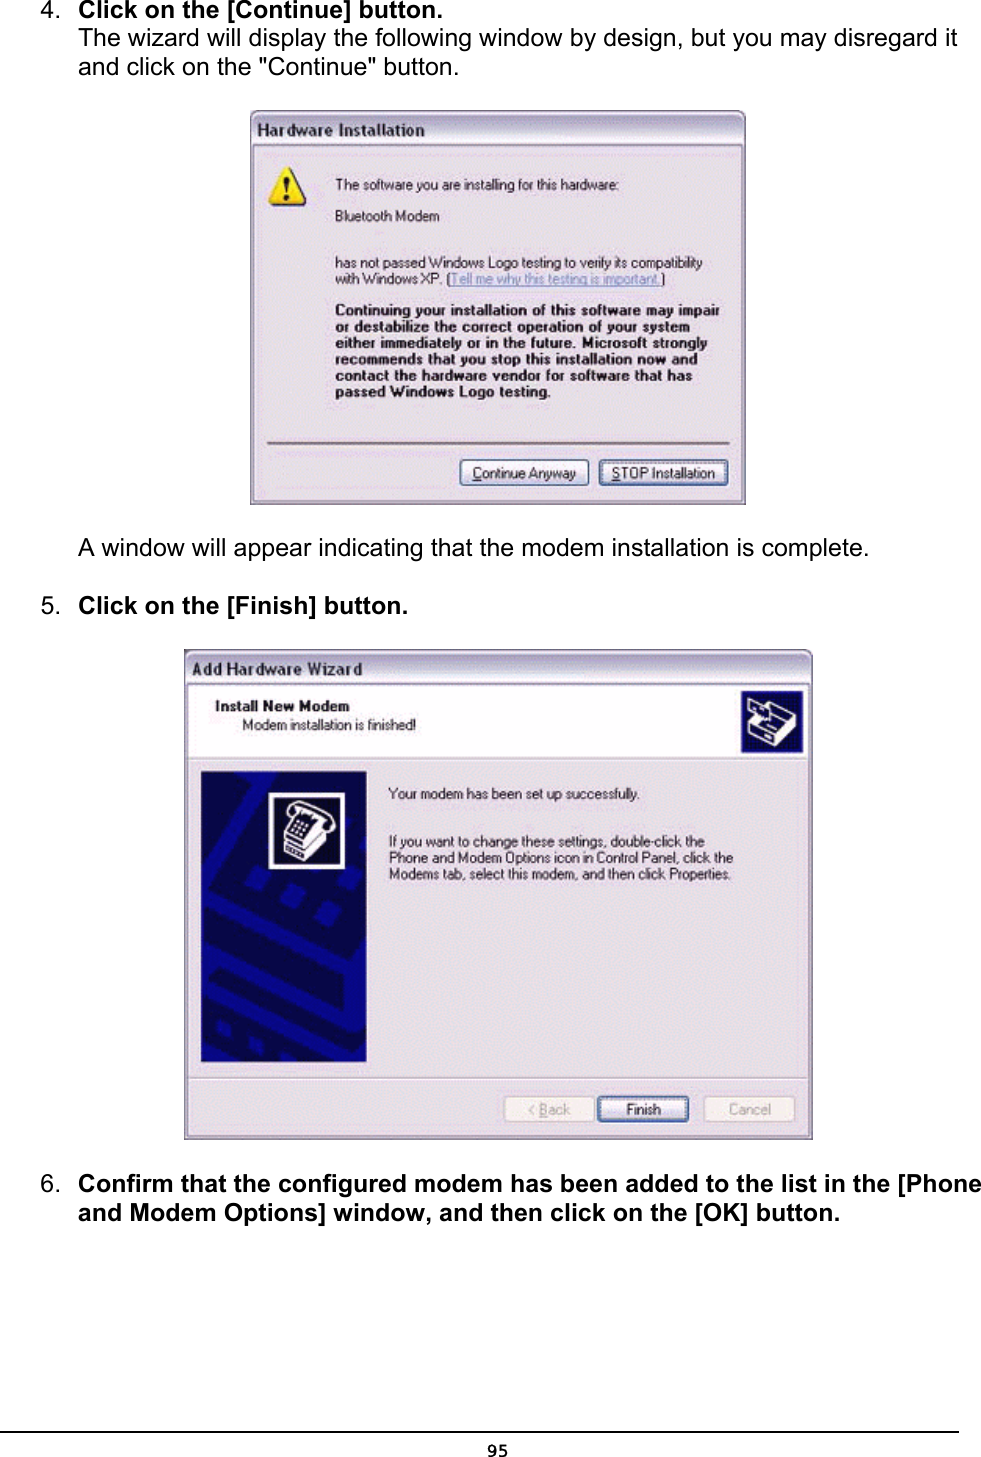  4.  Click on the [Continue] button. The wizard will display the following window by design, but you may disregard it and click on the &quot;Continue&quot; button.          A window will appear indicating that the modem installation is complete. 5.  Click on the [Finish] button.  6.  Confirm that the configured modem has been added to the list in the [Phone and Modem Options] window, and then click on the [OK] button.  95